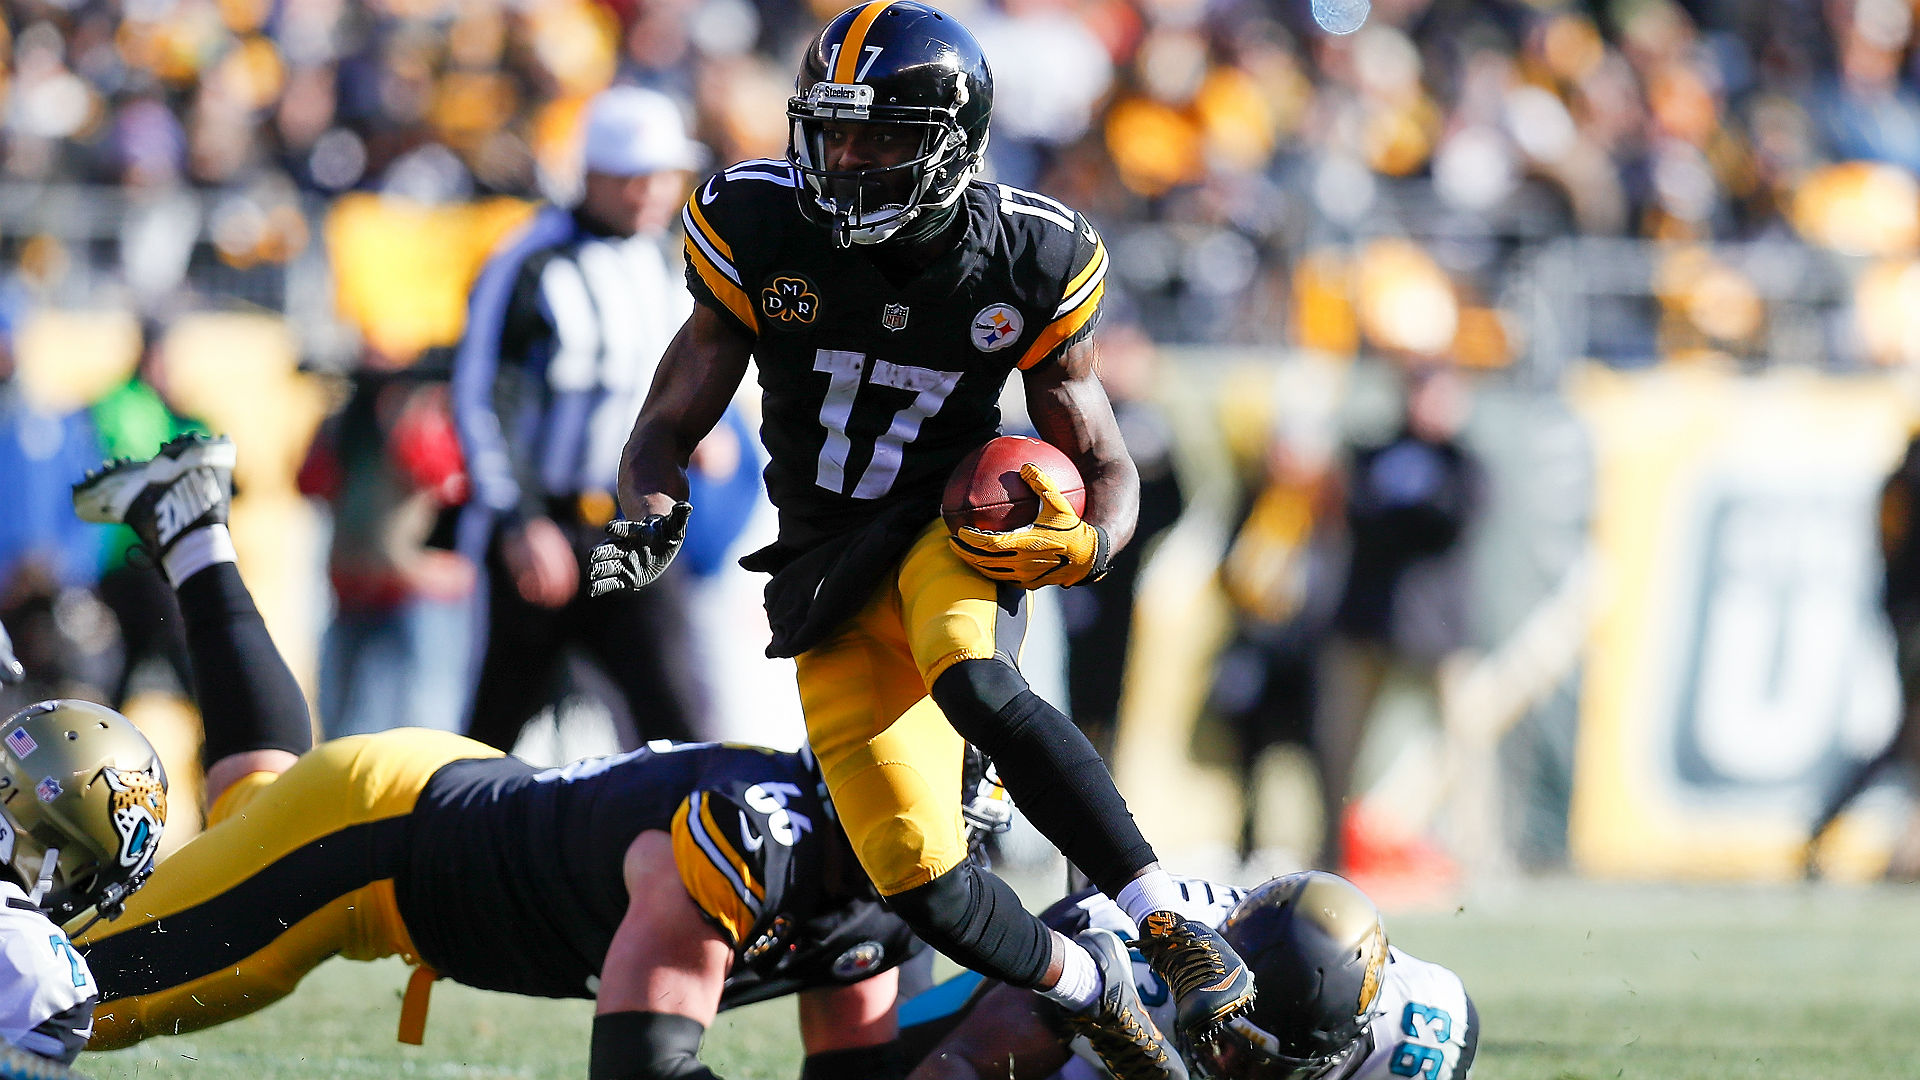 Steelers wide receiver Eli Rogers suspended 1 game for violating NFL's substance abuse policy